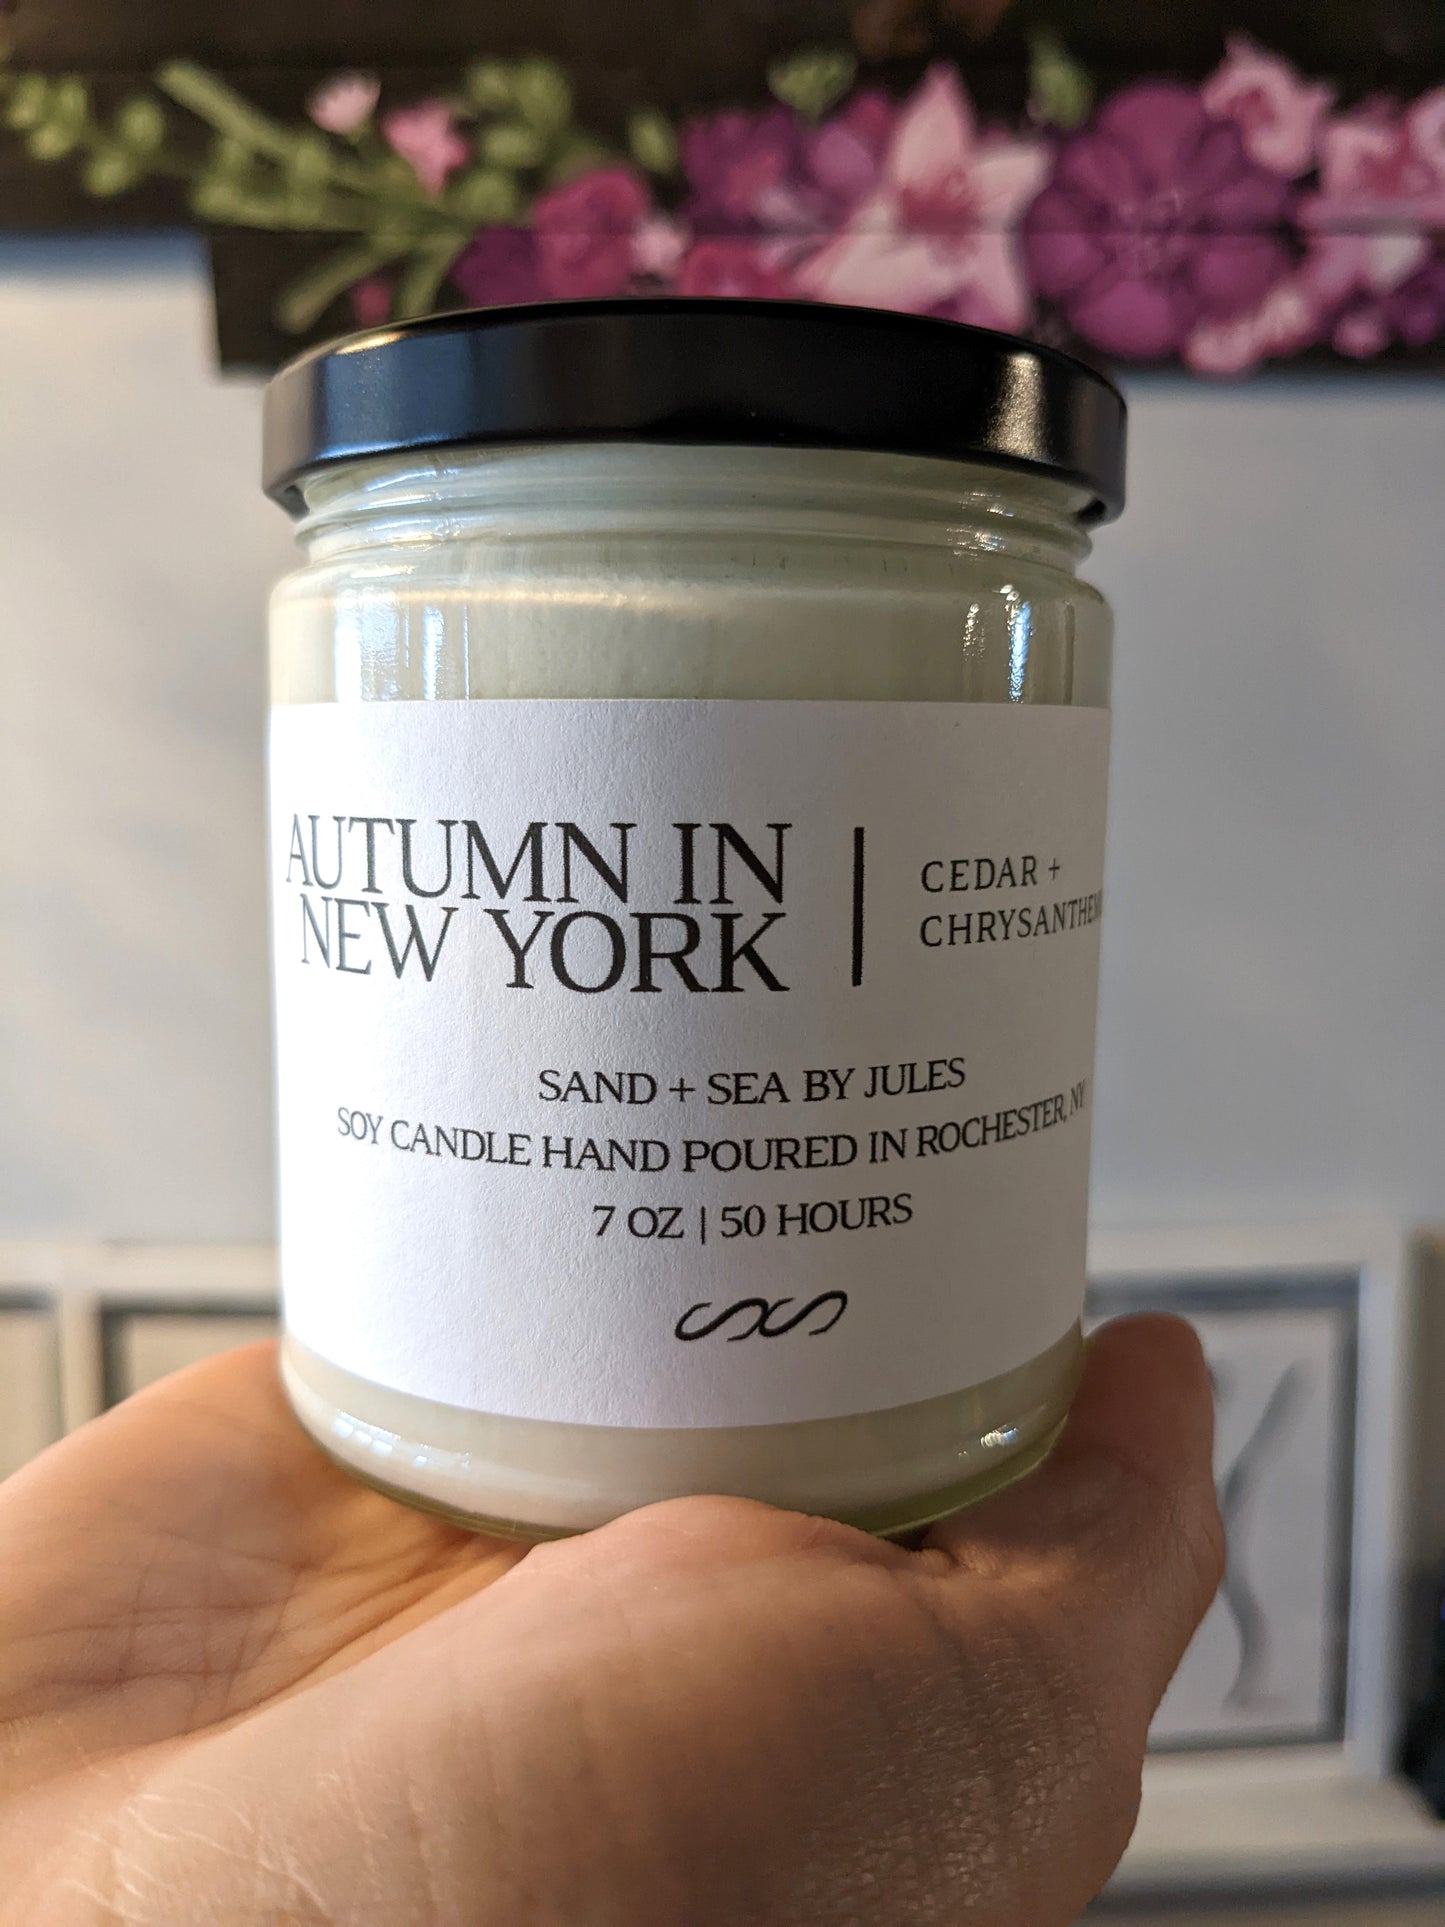 Hand-poured soy candles, Asst'd